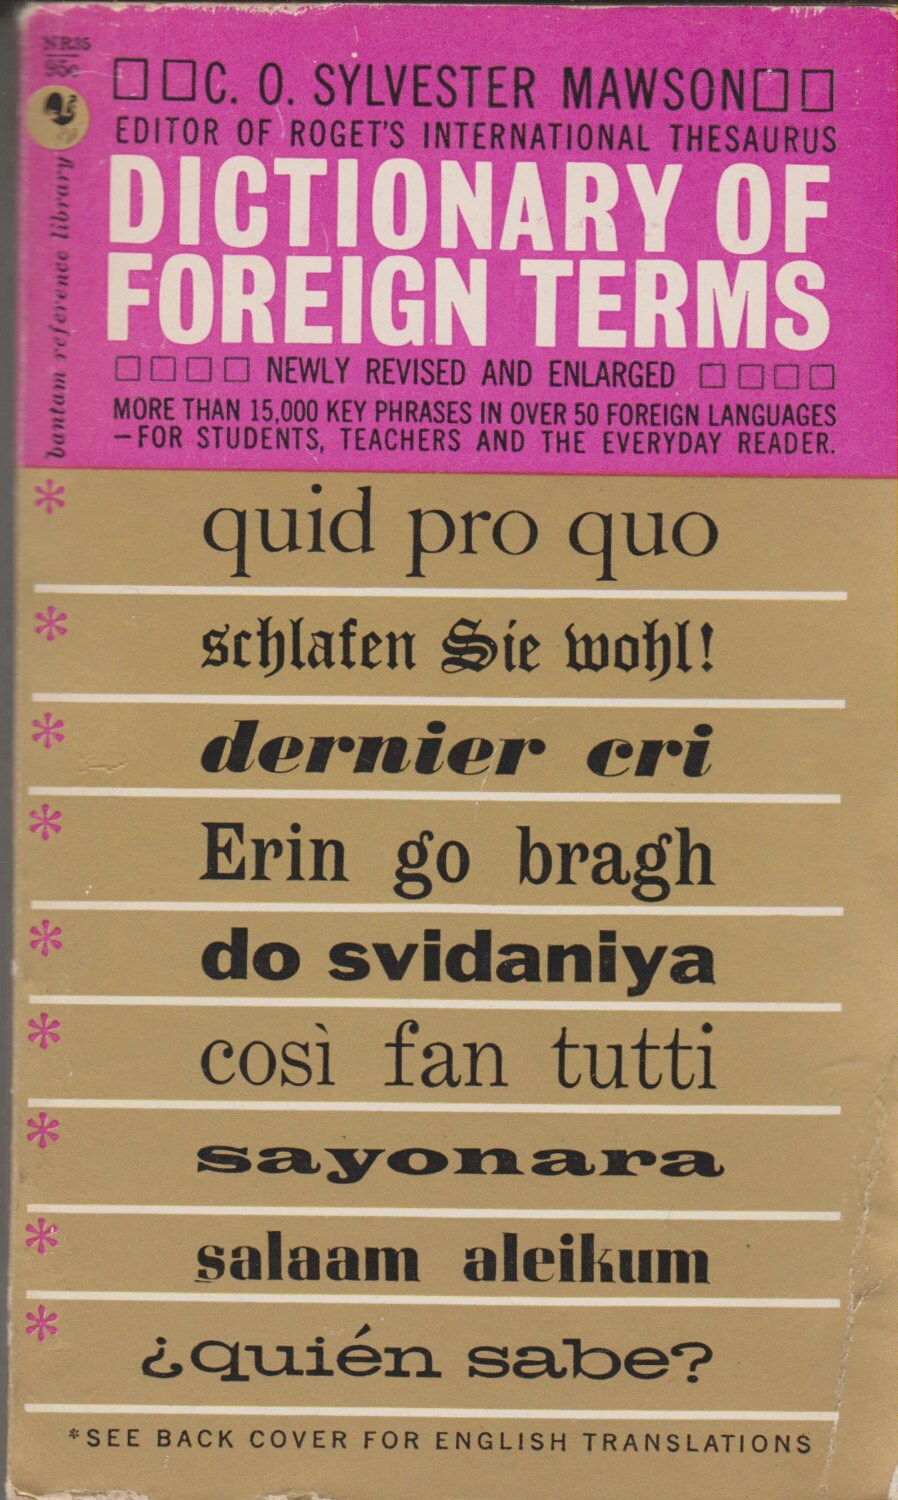 dictionary-of-foreign-terms-by-c-o-sylvester-mawson-paperback-reference-foreign-1961